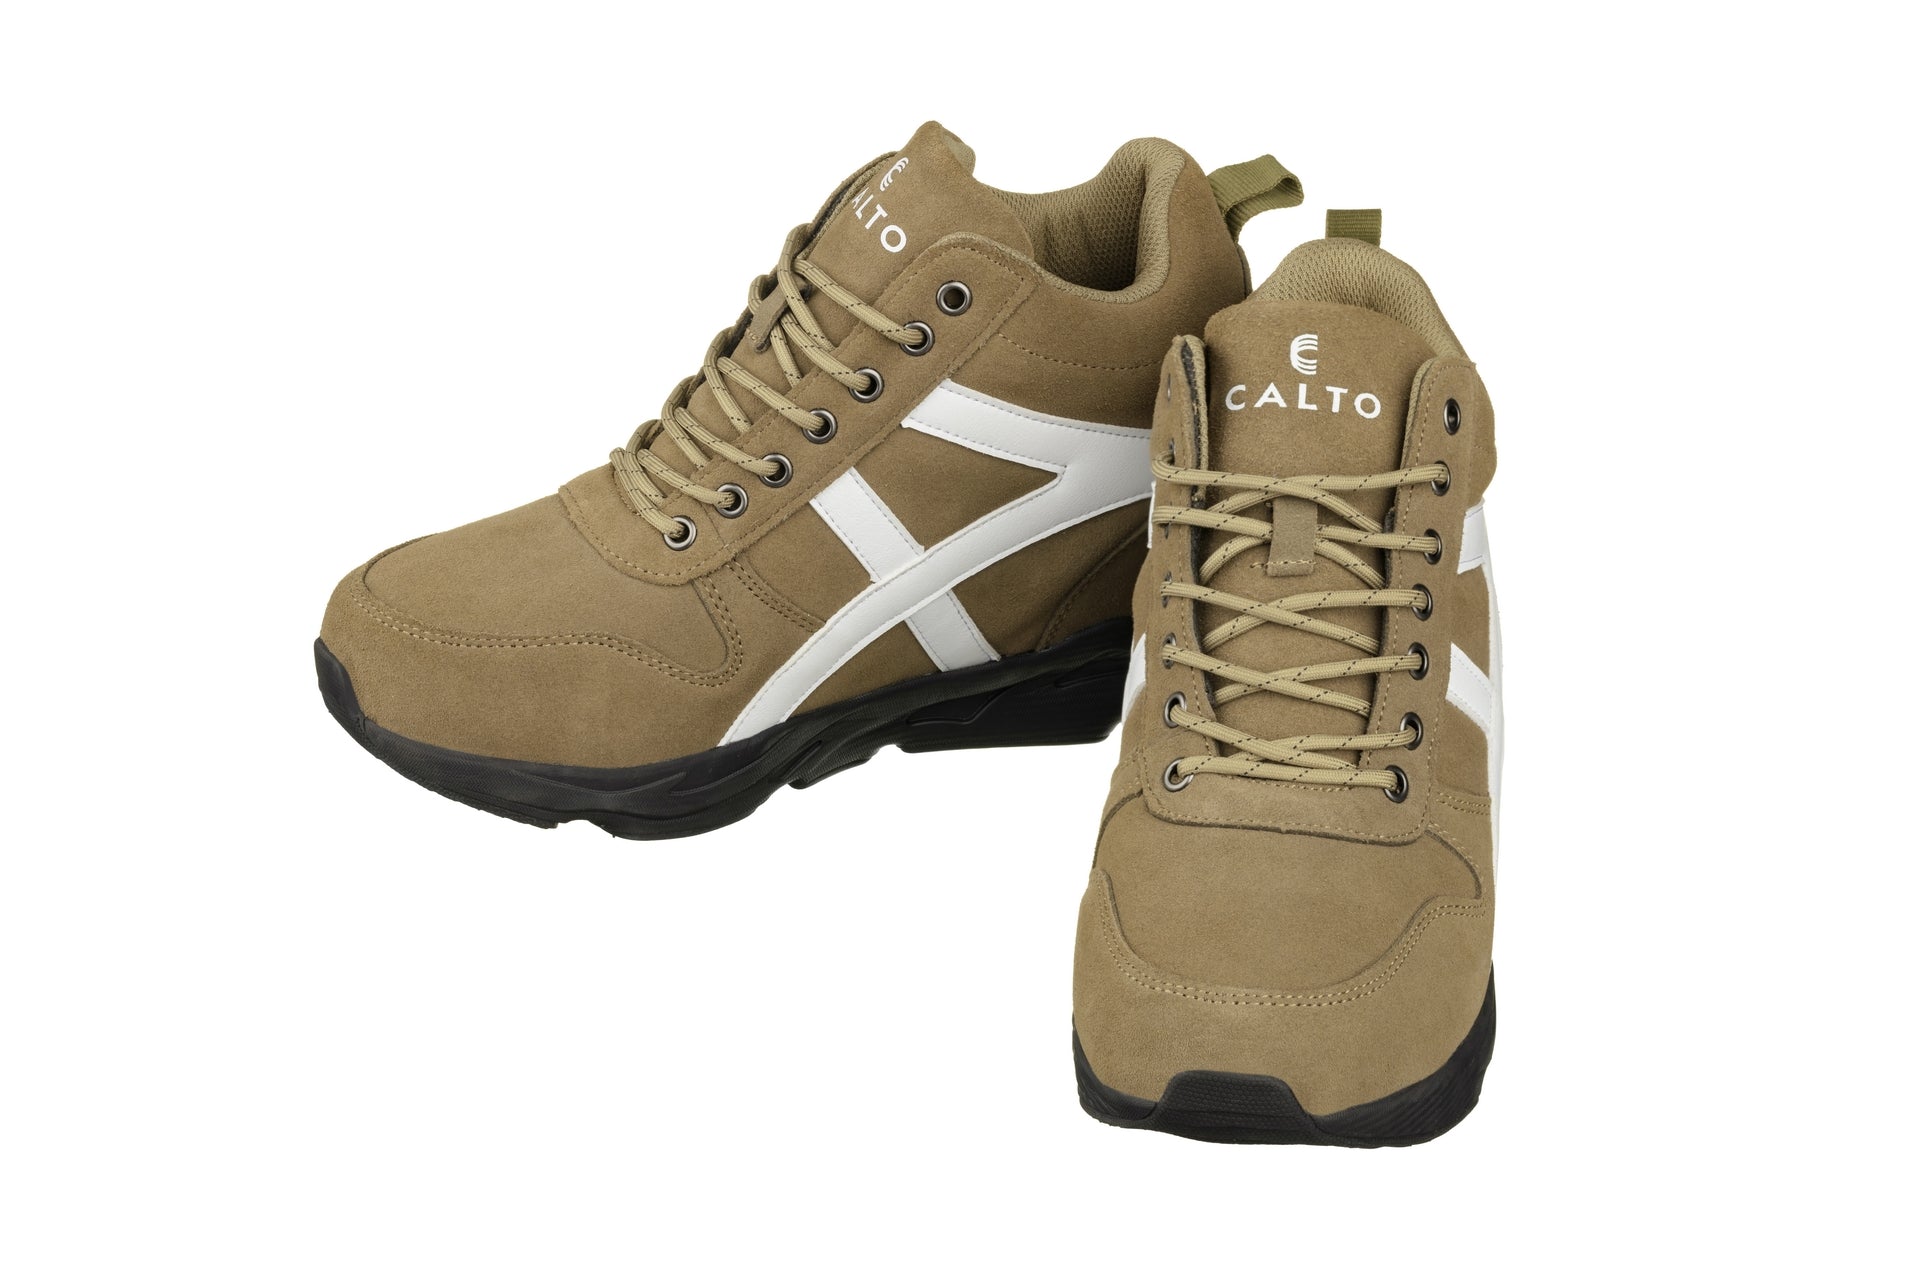 Elevator shoes height increase CALTO - S22782 - 3.6 Inches Taller (Khaki/White) - Hiking Style Boots